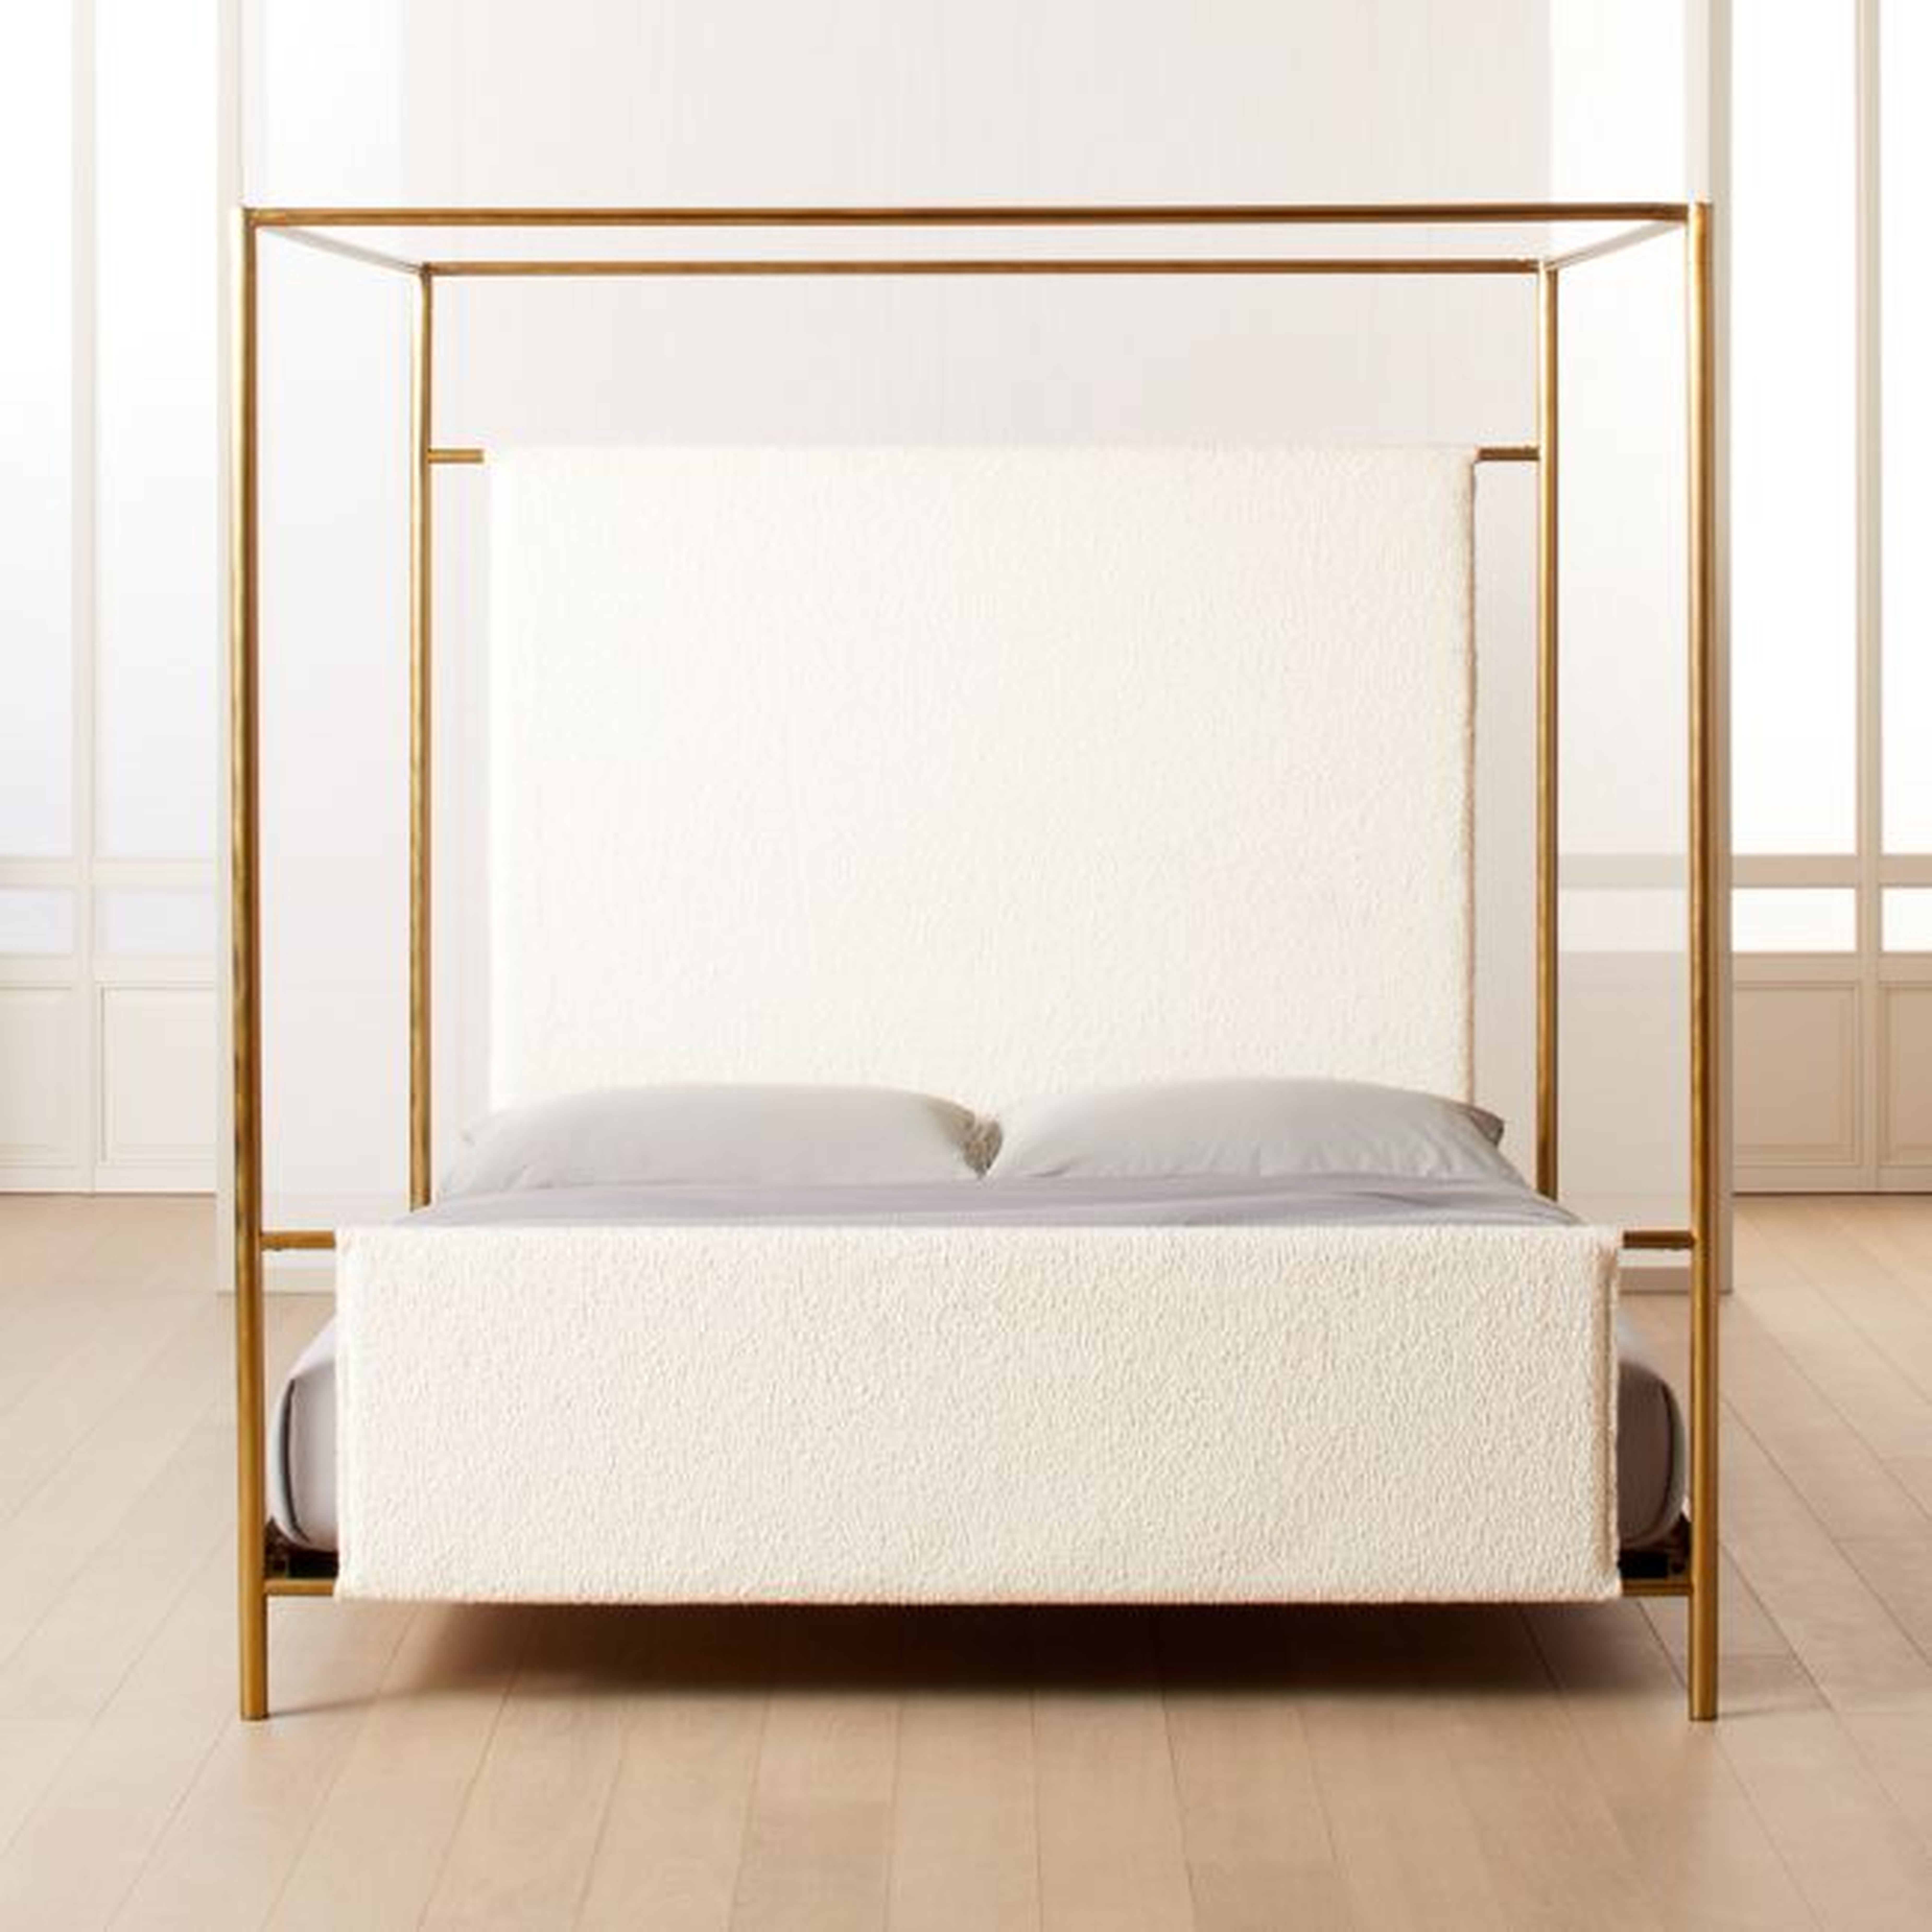 Odessa Shearling Canopy Bed King - CB2